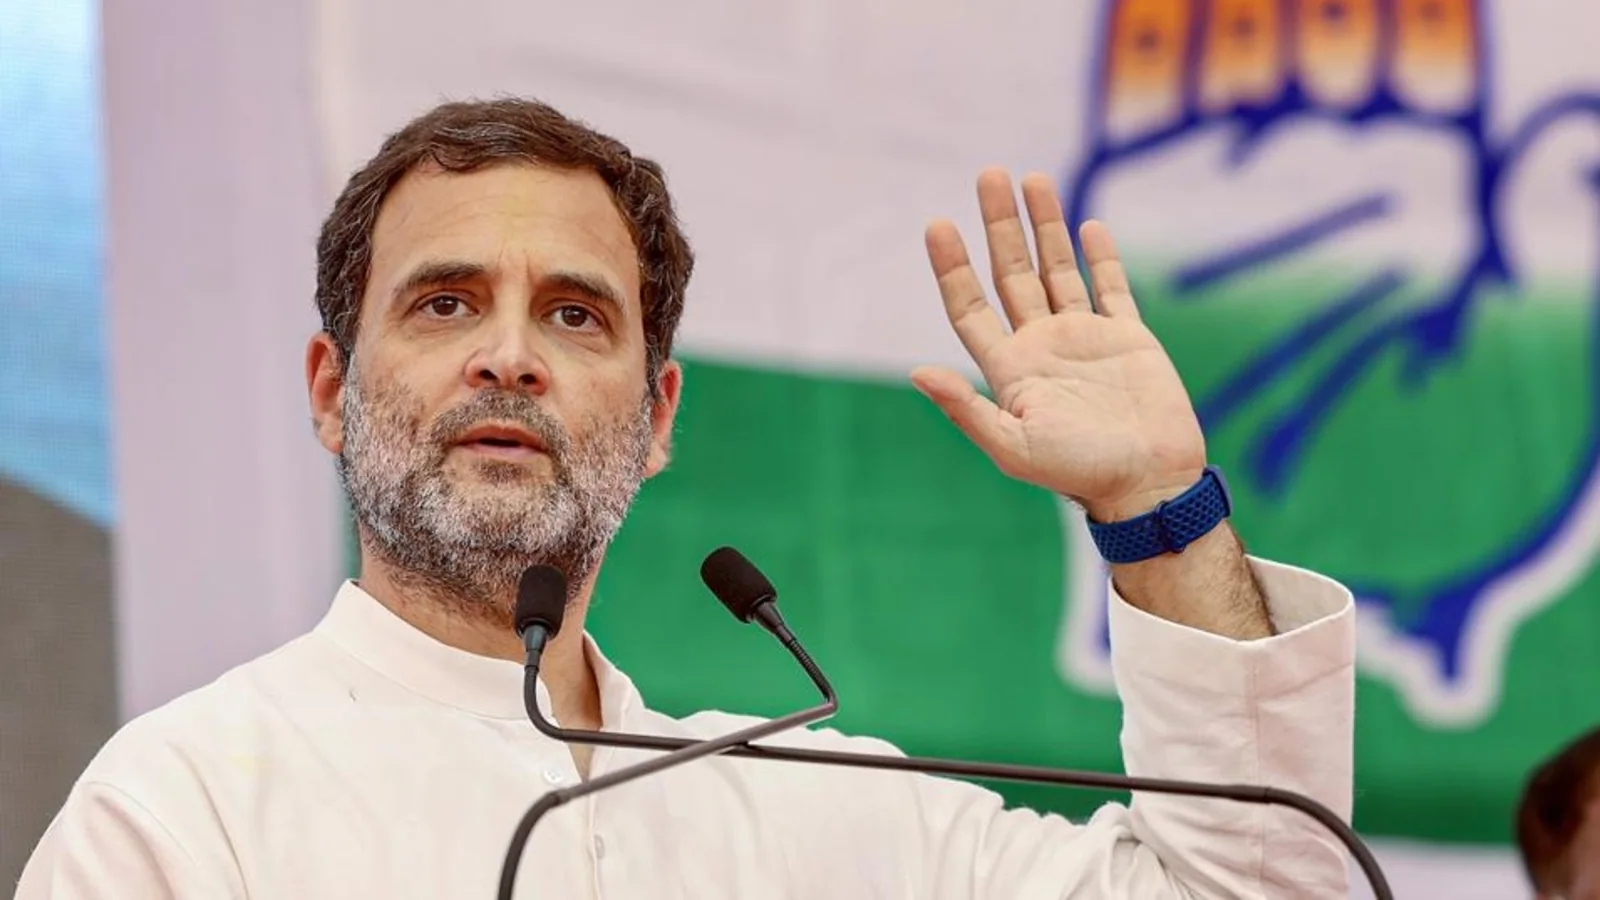 ‘A case study’: Rahul Gandhi’s jibe at Modi over power crisis, inflation